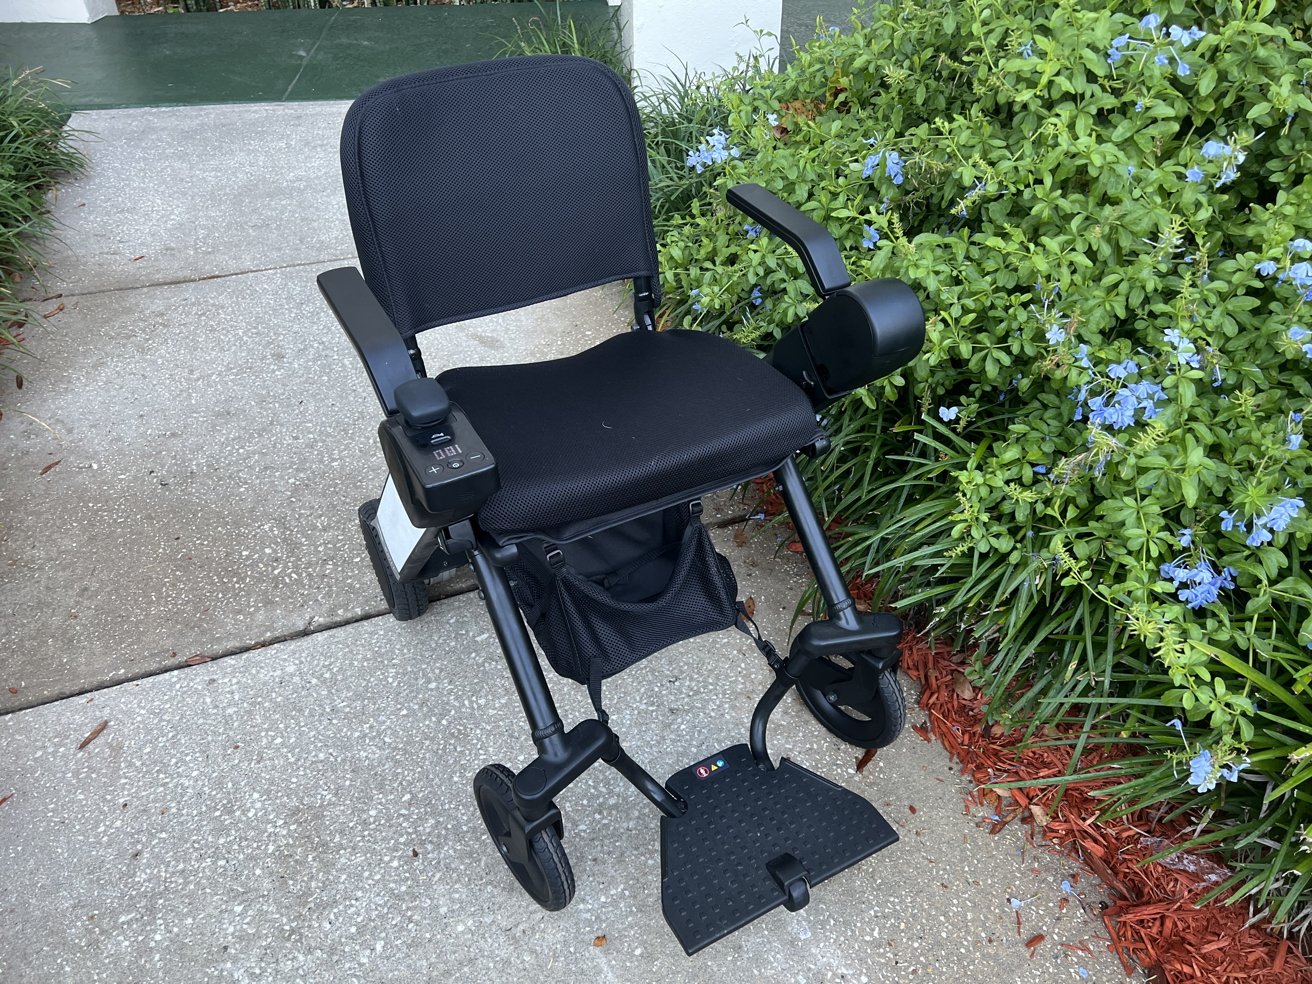 Whill Mannequin F Journey Chair overview: What Apple would make, if it needed to